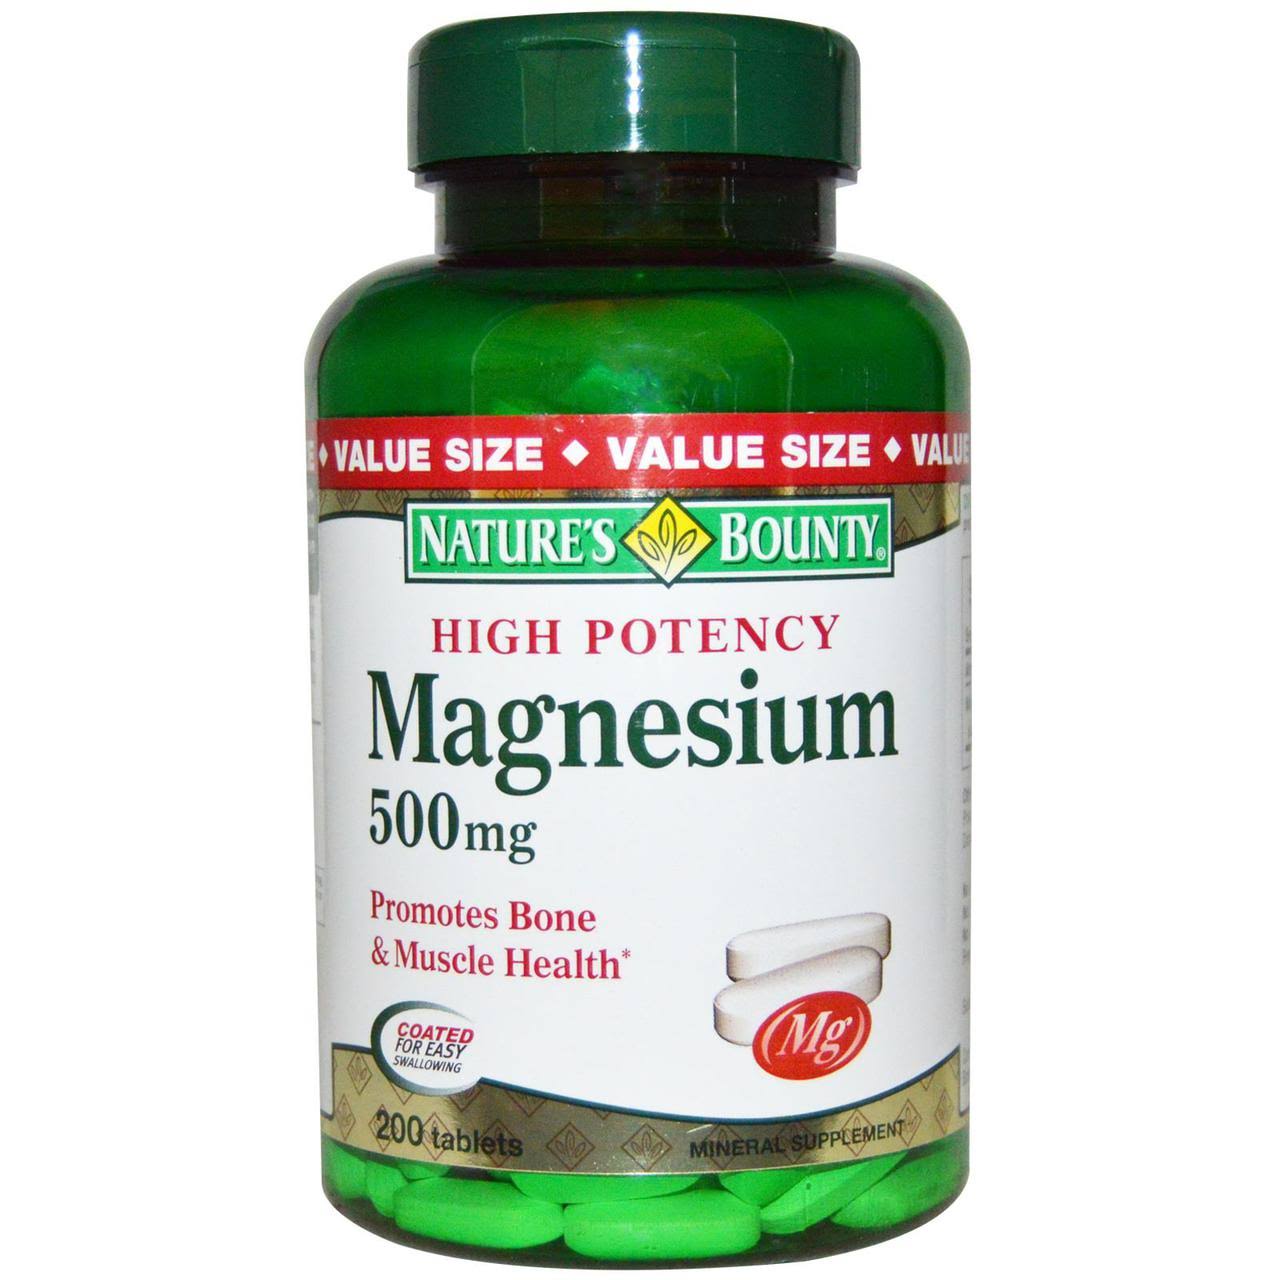 Nature's Bounty, Magnesium - 500mg, 200 Tablets